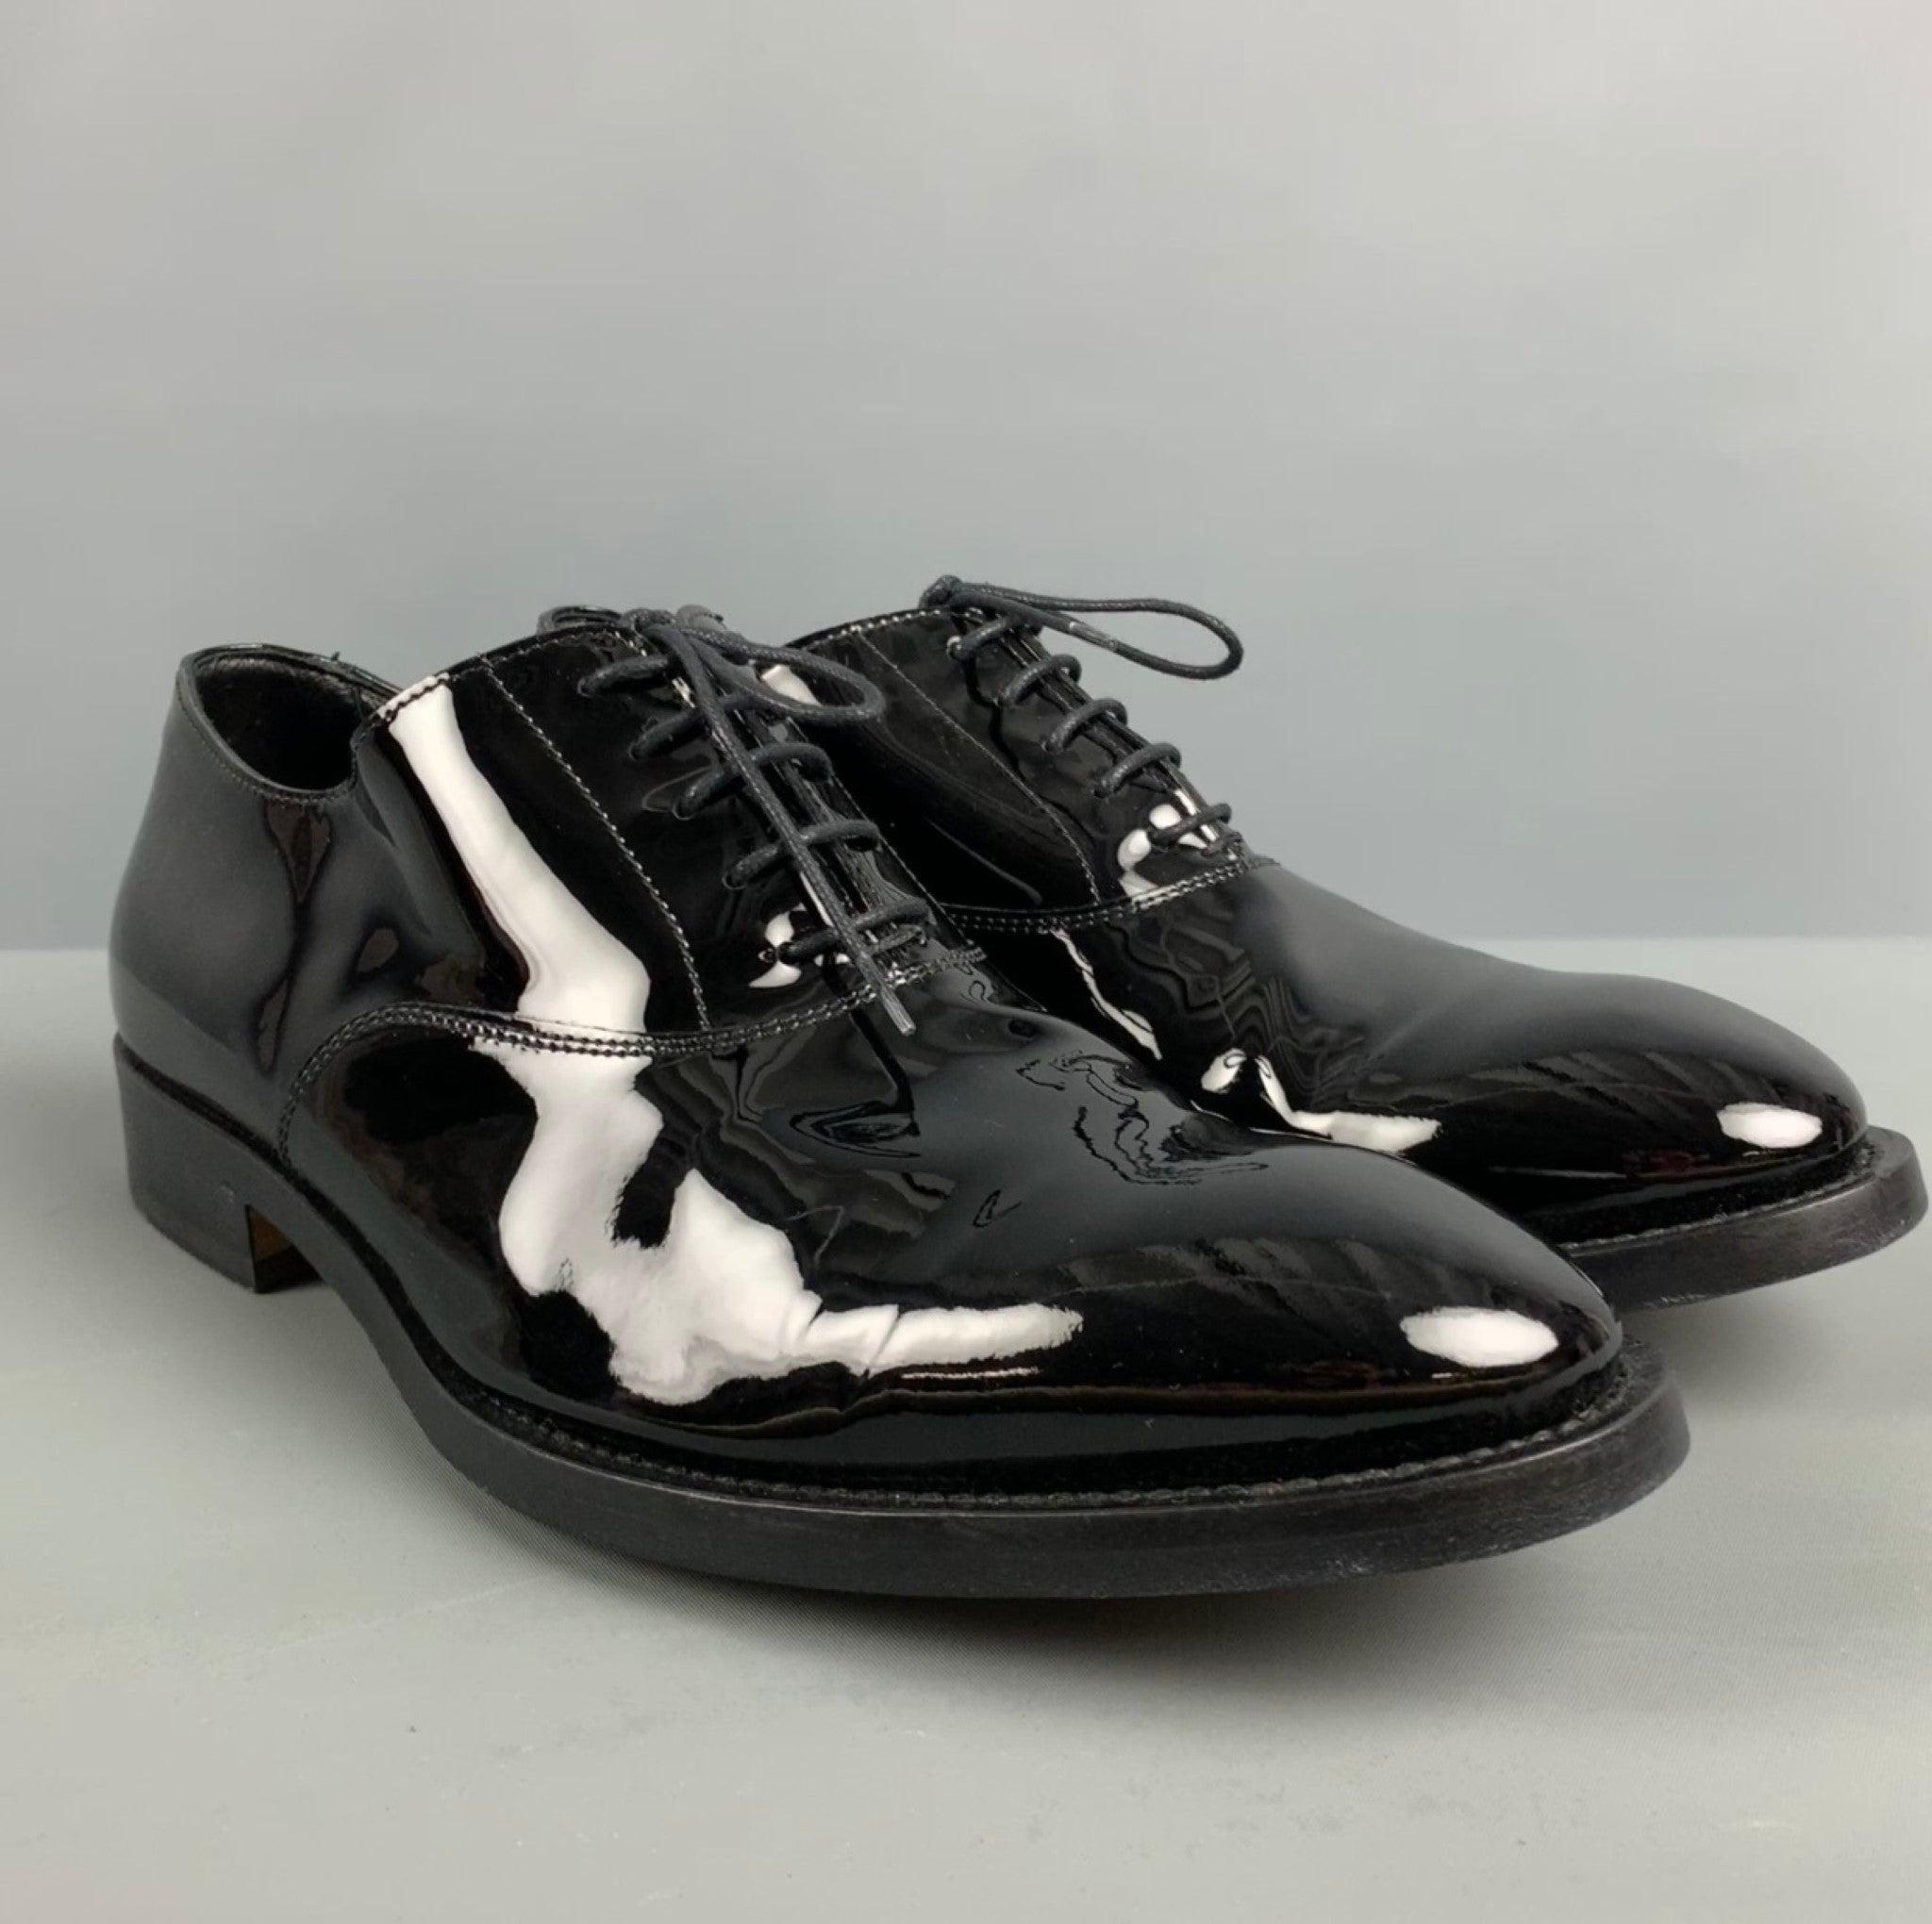 PAUL SMITH shoes comes in a black patent leather featuring a classic style and a lace up closure. Made in Italy. Excellent Pre-Owned Condition. 

Marked:   GSN01 9 43Outsole: 12 inches  x 4.25 inches  
  
  
 
Reference No.: 128213
Category: Lace Up